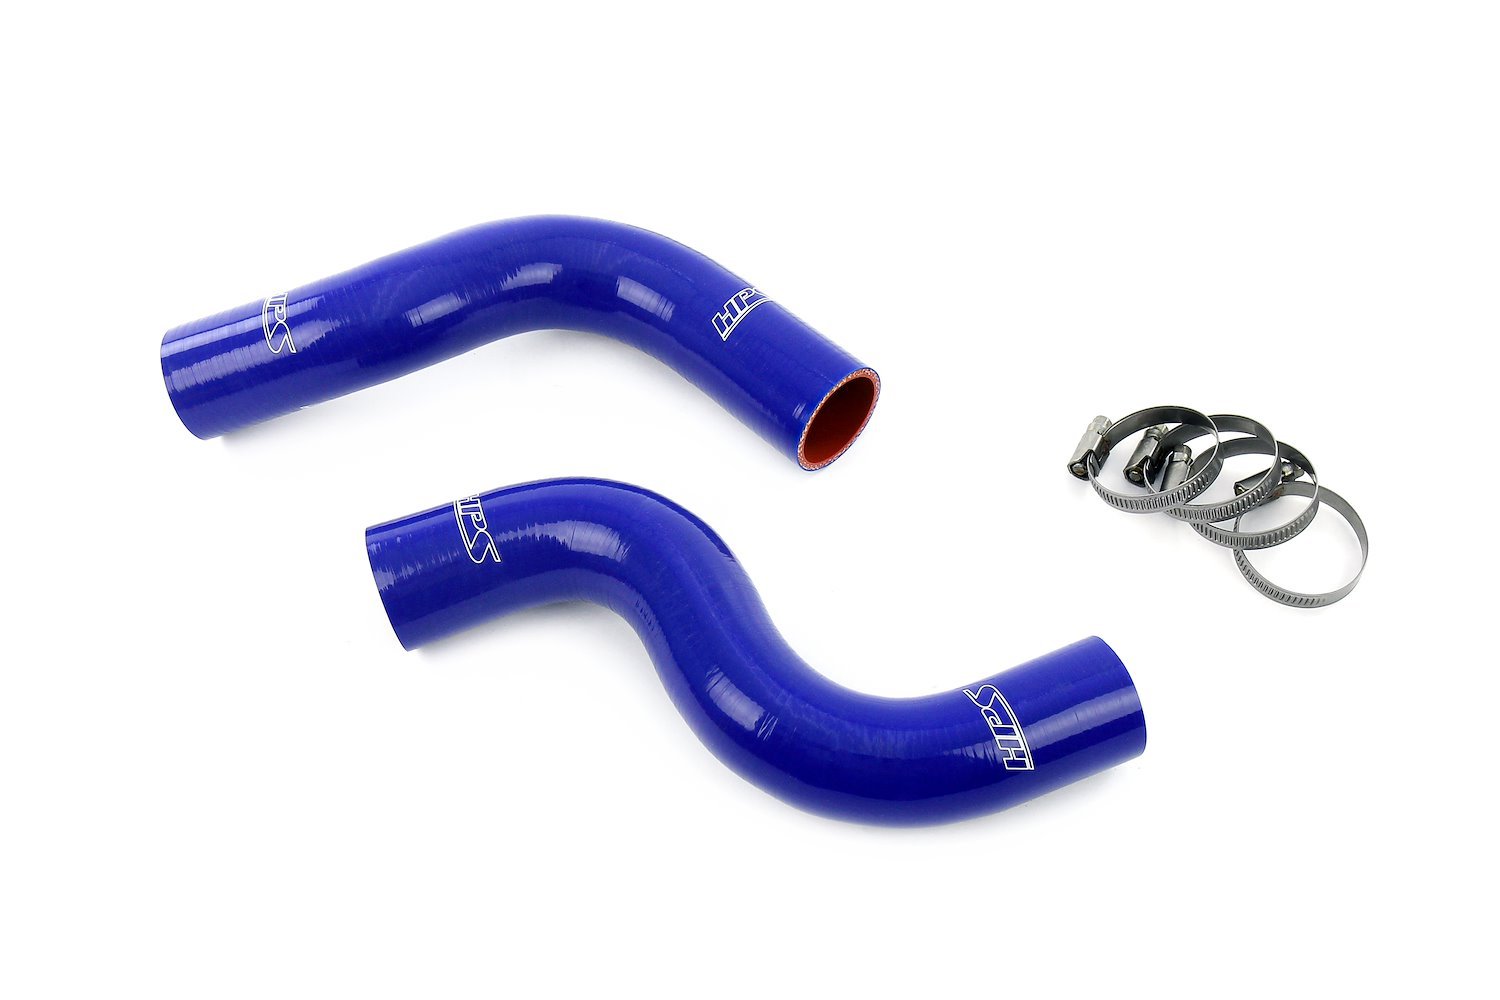 57-2109-BLUE Radiator Hose Kit, 3-Ply Reinforced Silicone, Replaces Rubber Radiator Coolant Hoses